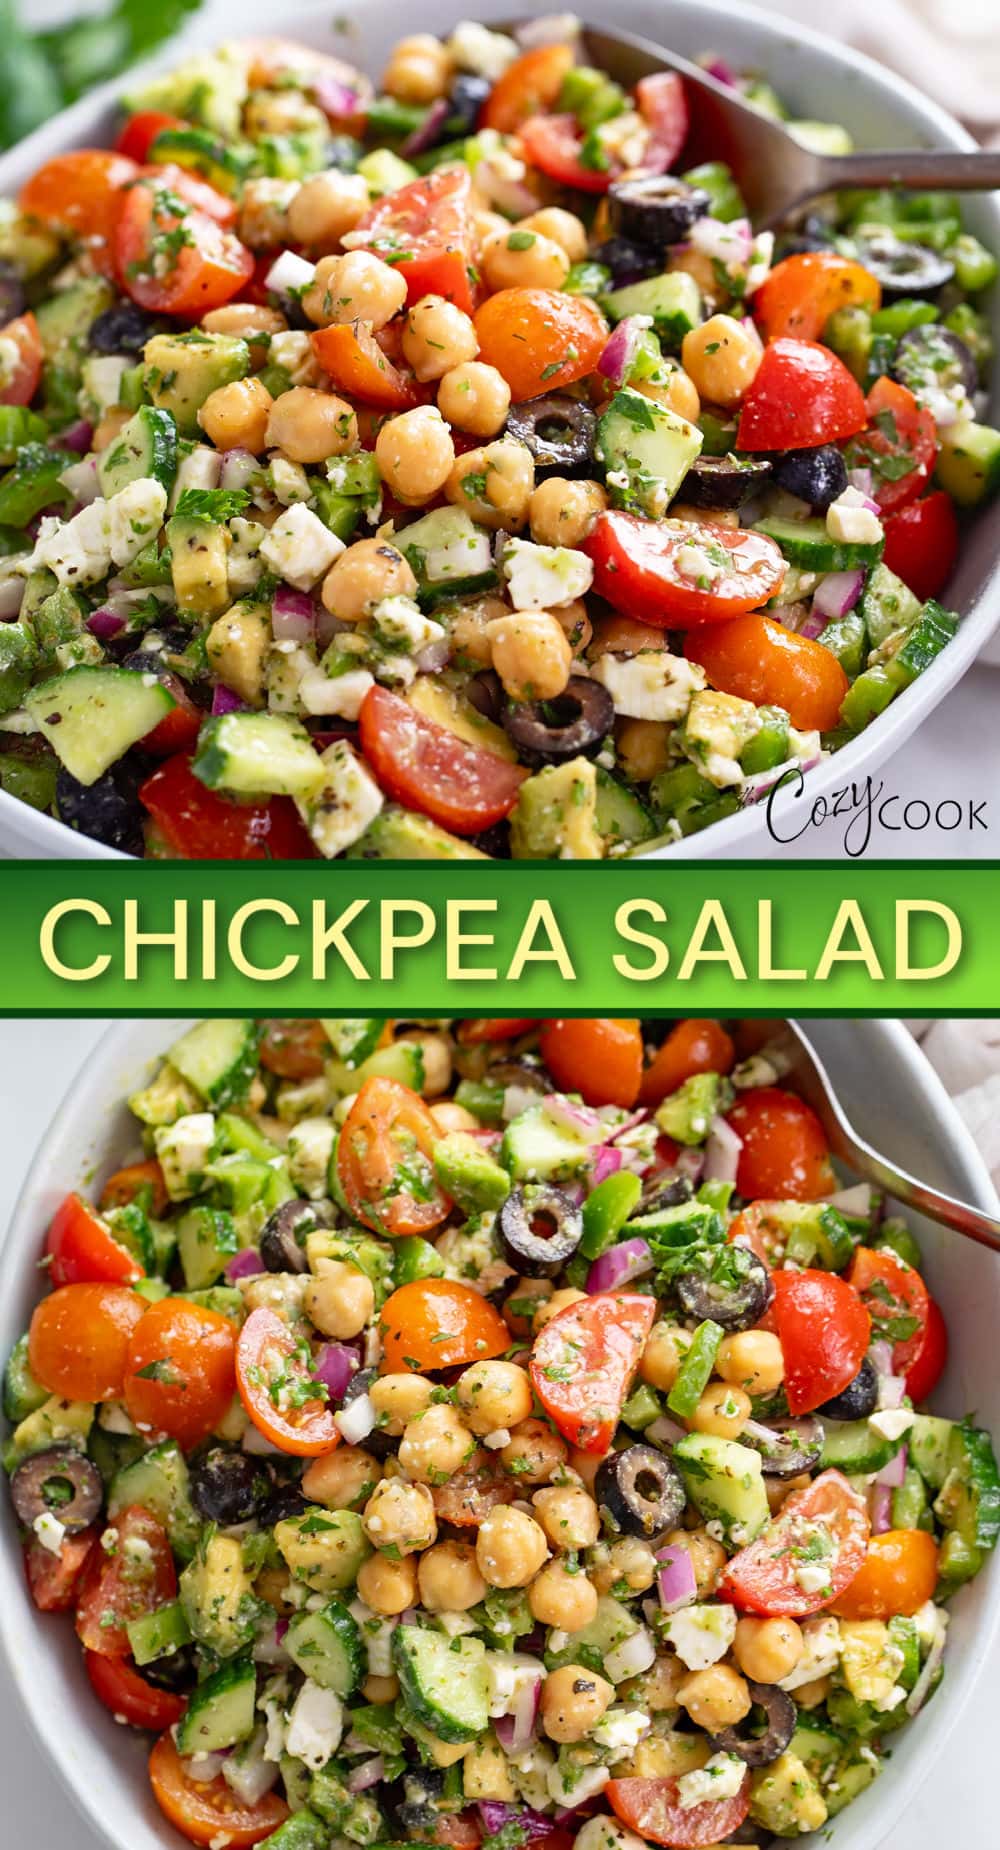 Chickpea Salad - The Cozy Cook